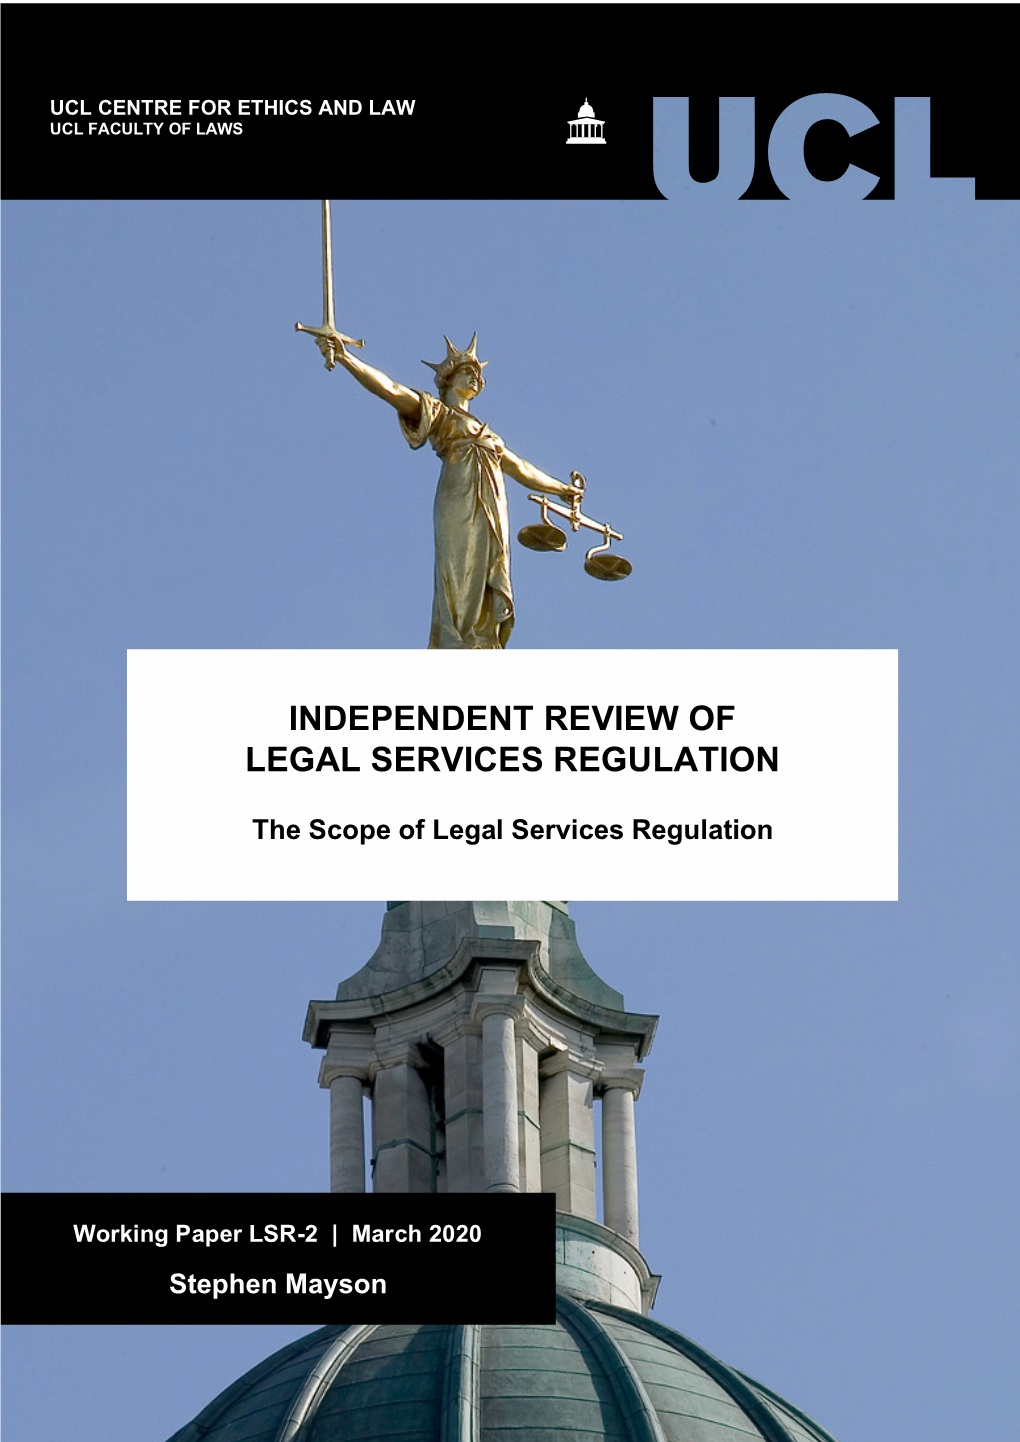 2. the Scope of Legal Services Regulation